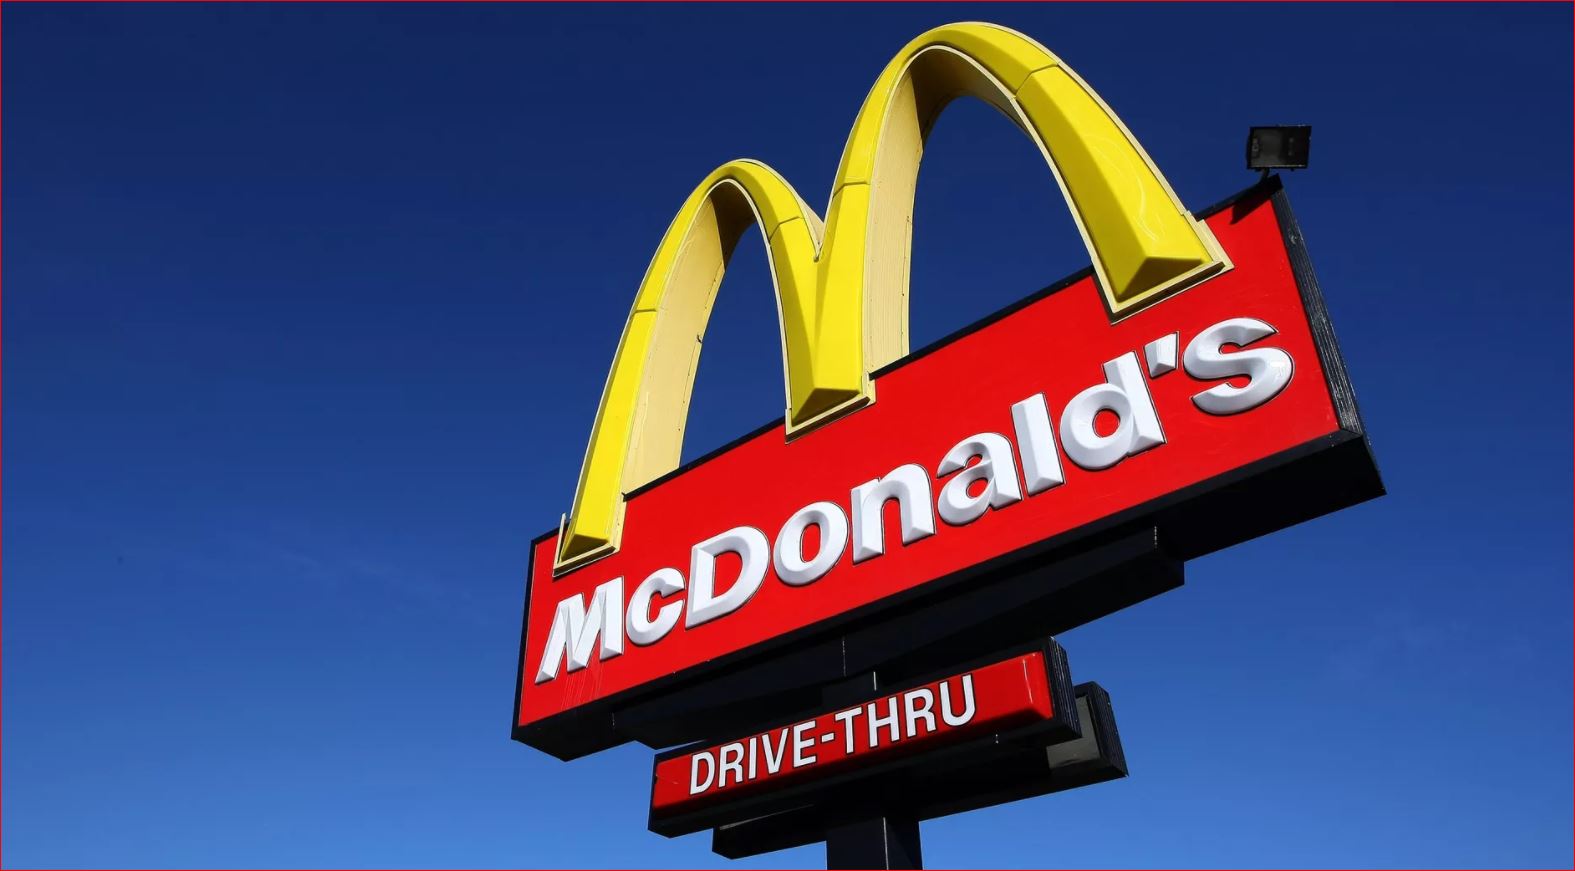 McDonald's Employee Discount In 2022 (All You Need To Know)